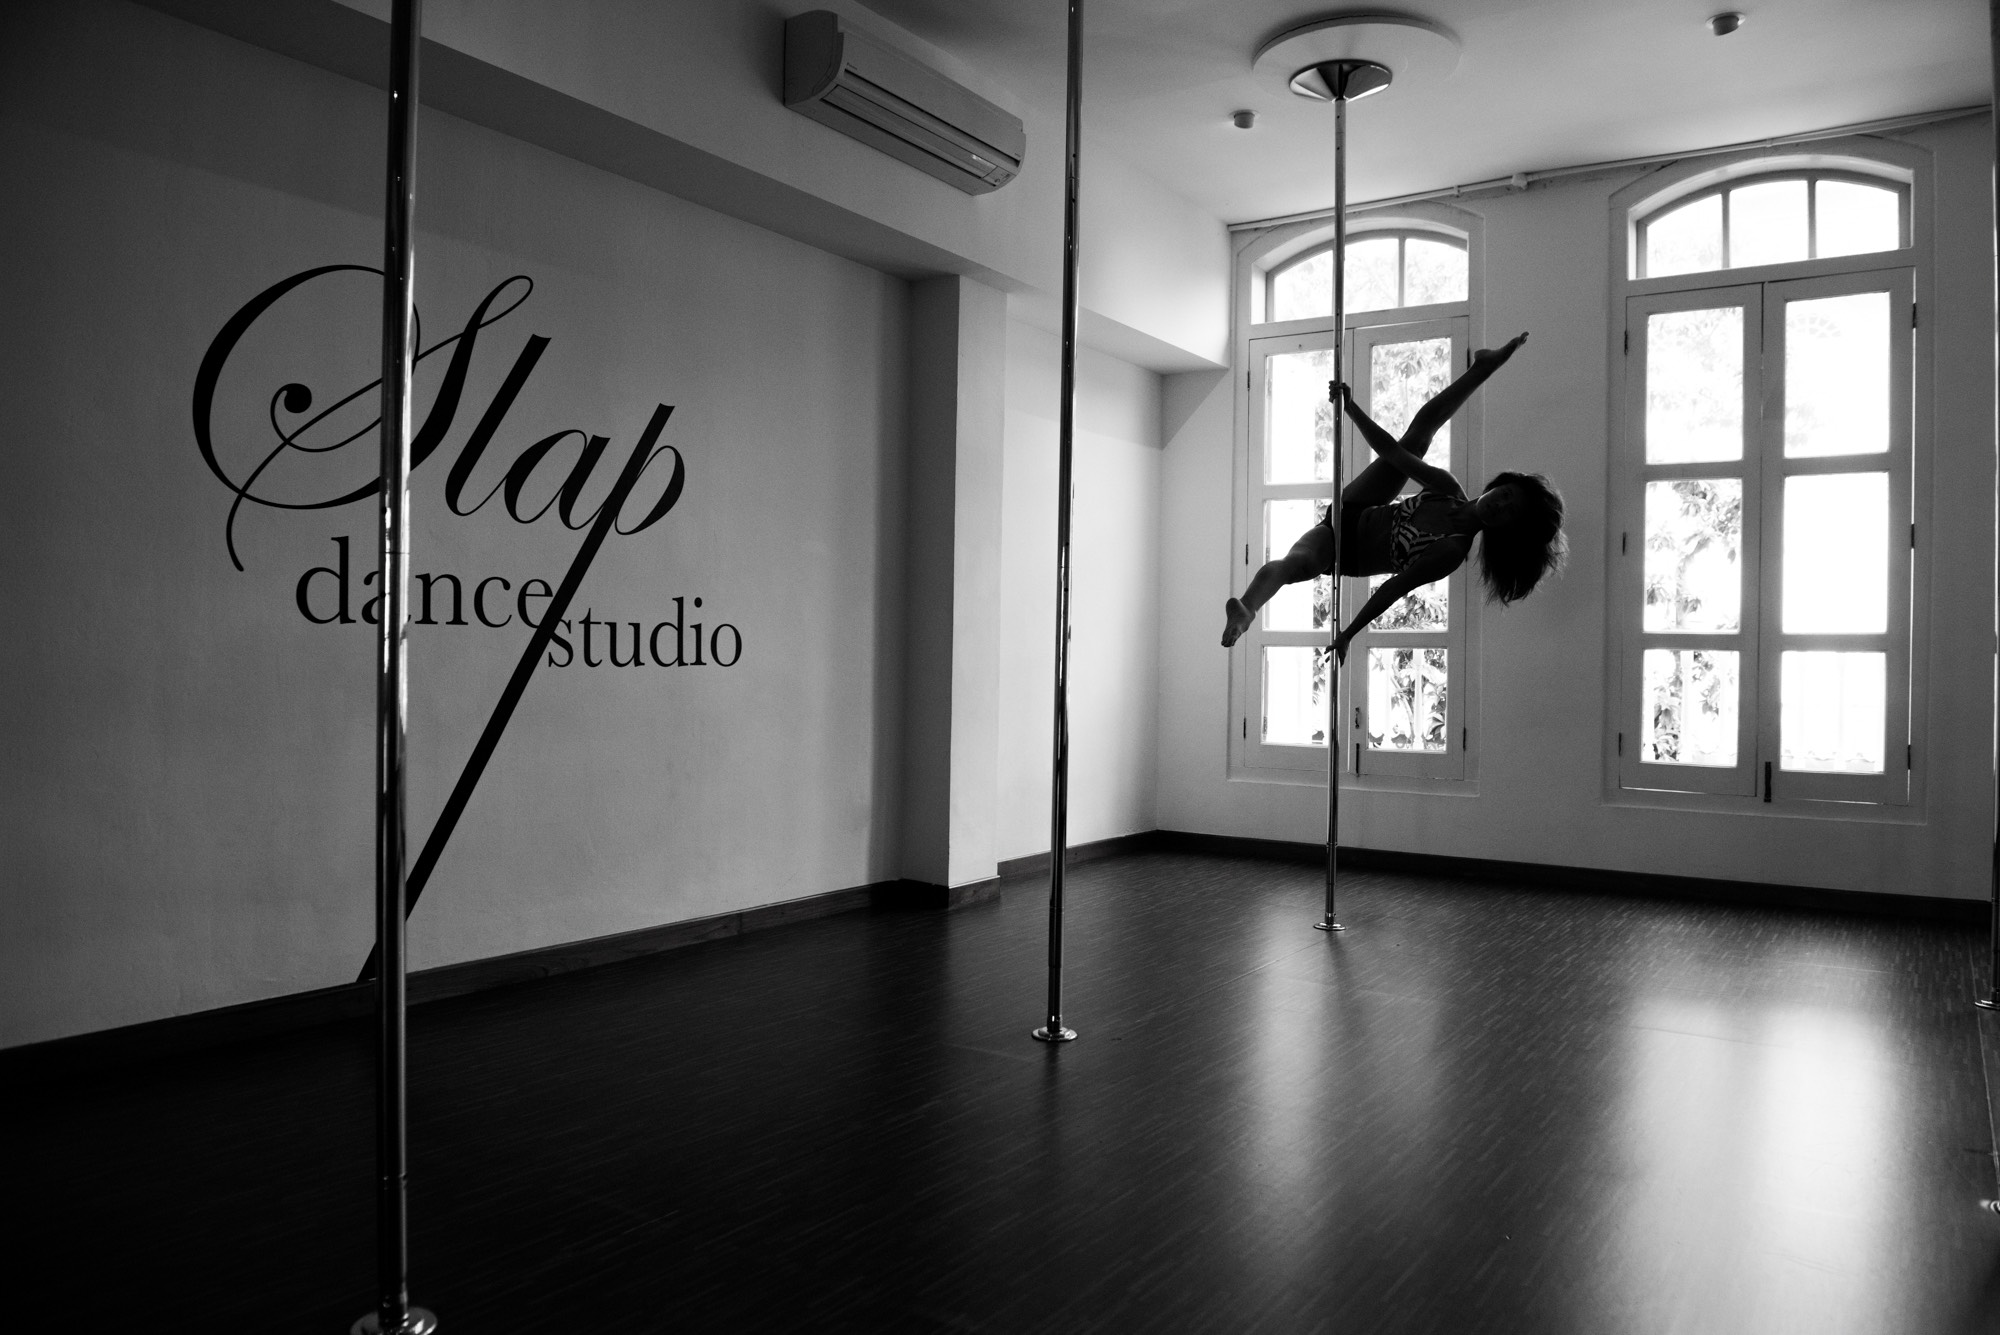 5 Myths About Pole Dancing, Debunked